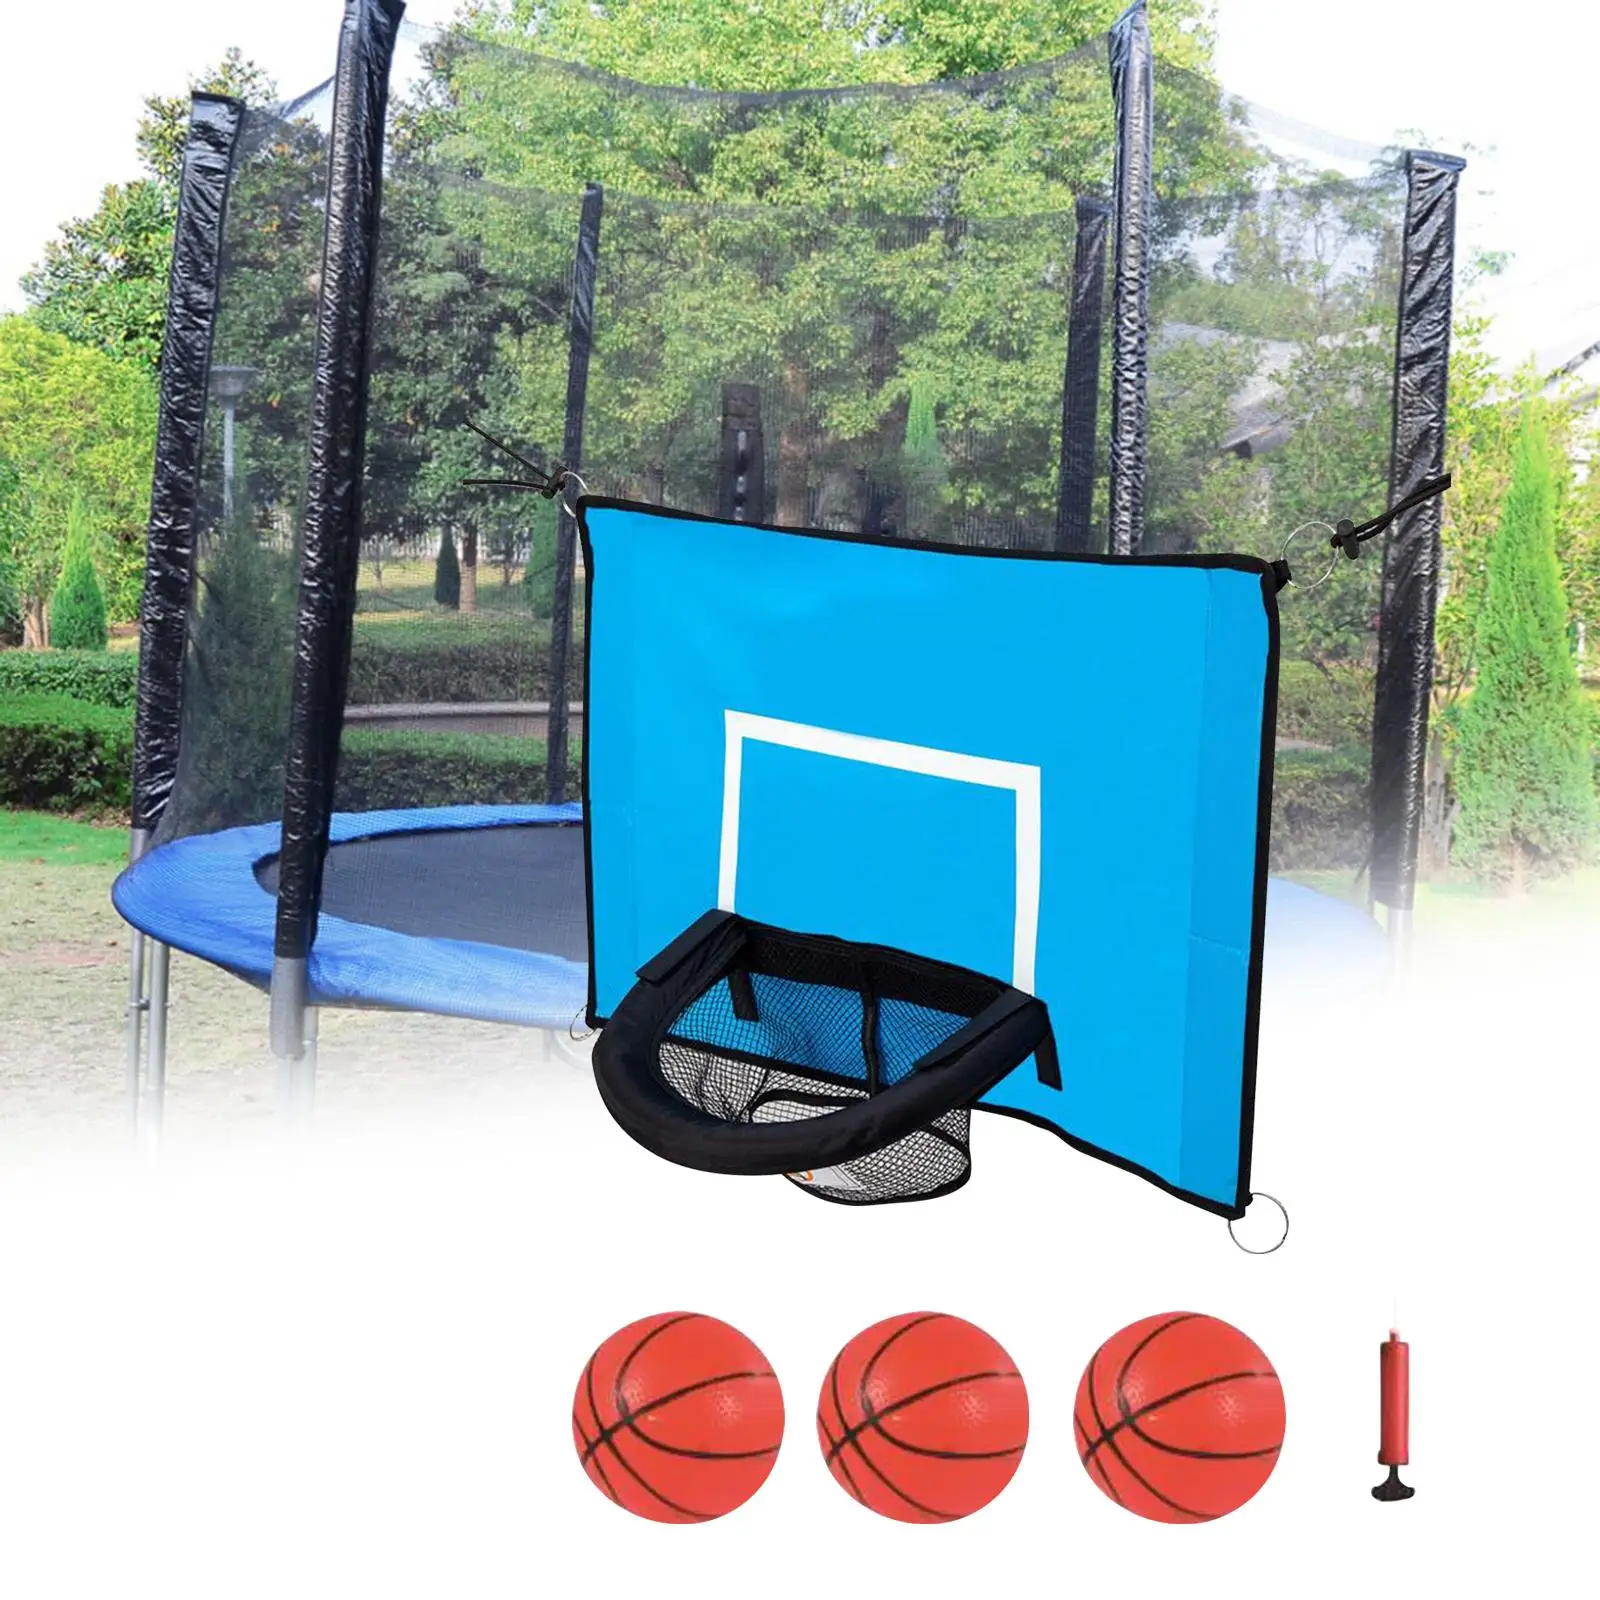 Mini Basketball Hoop for Trampoline Trampoline Accessories Playing Gifts with Pump Kids Waterproof Universal Basketball Training